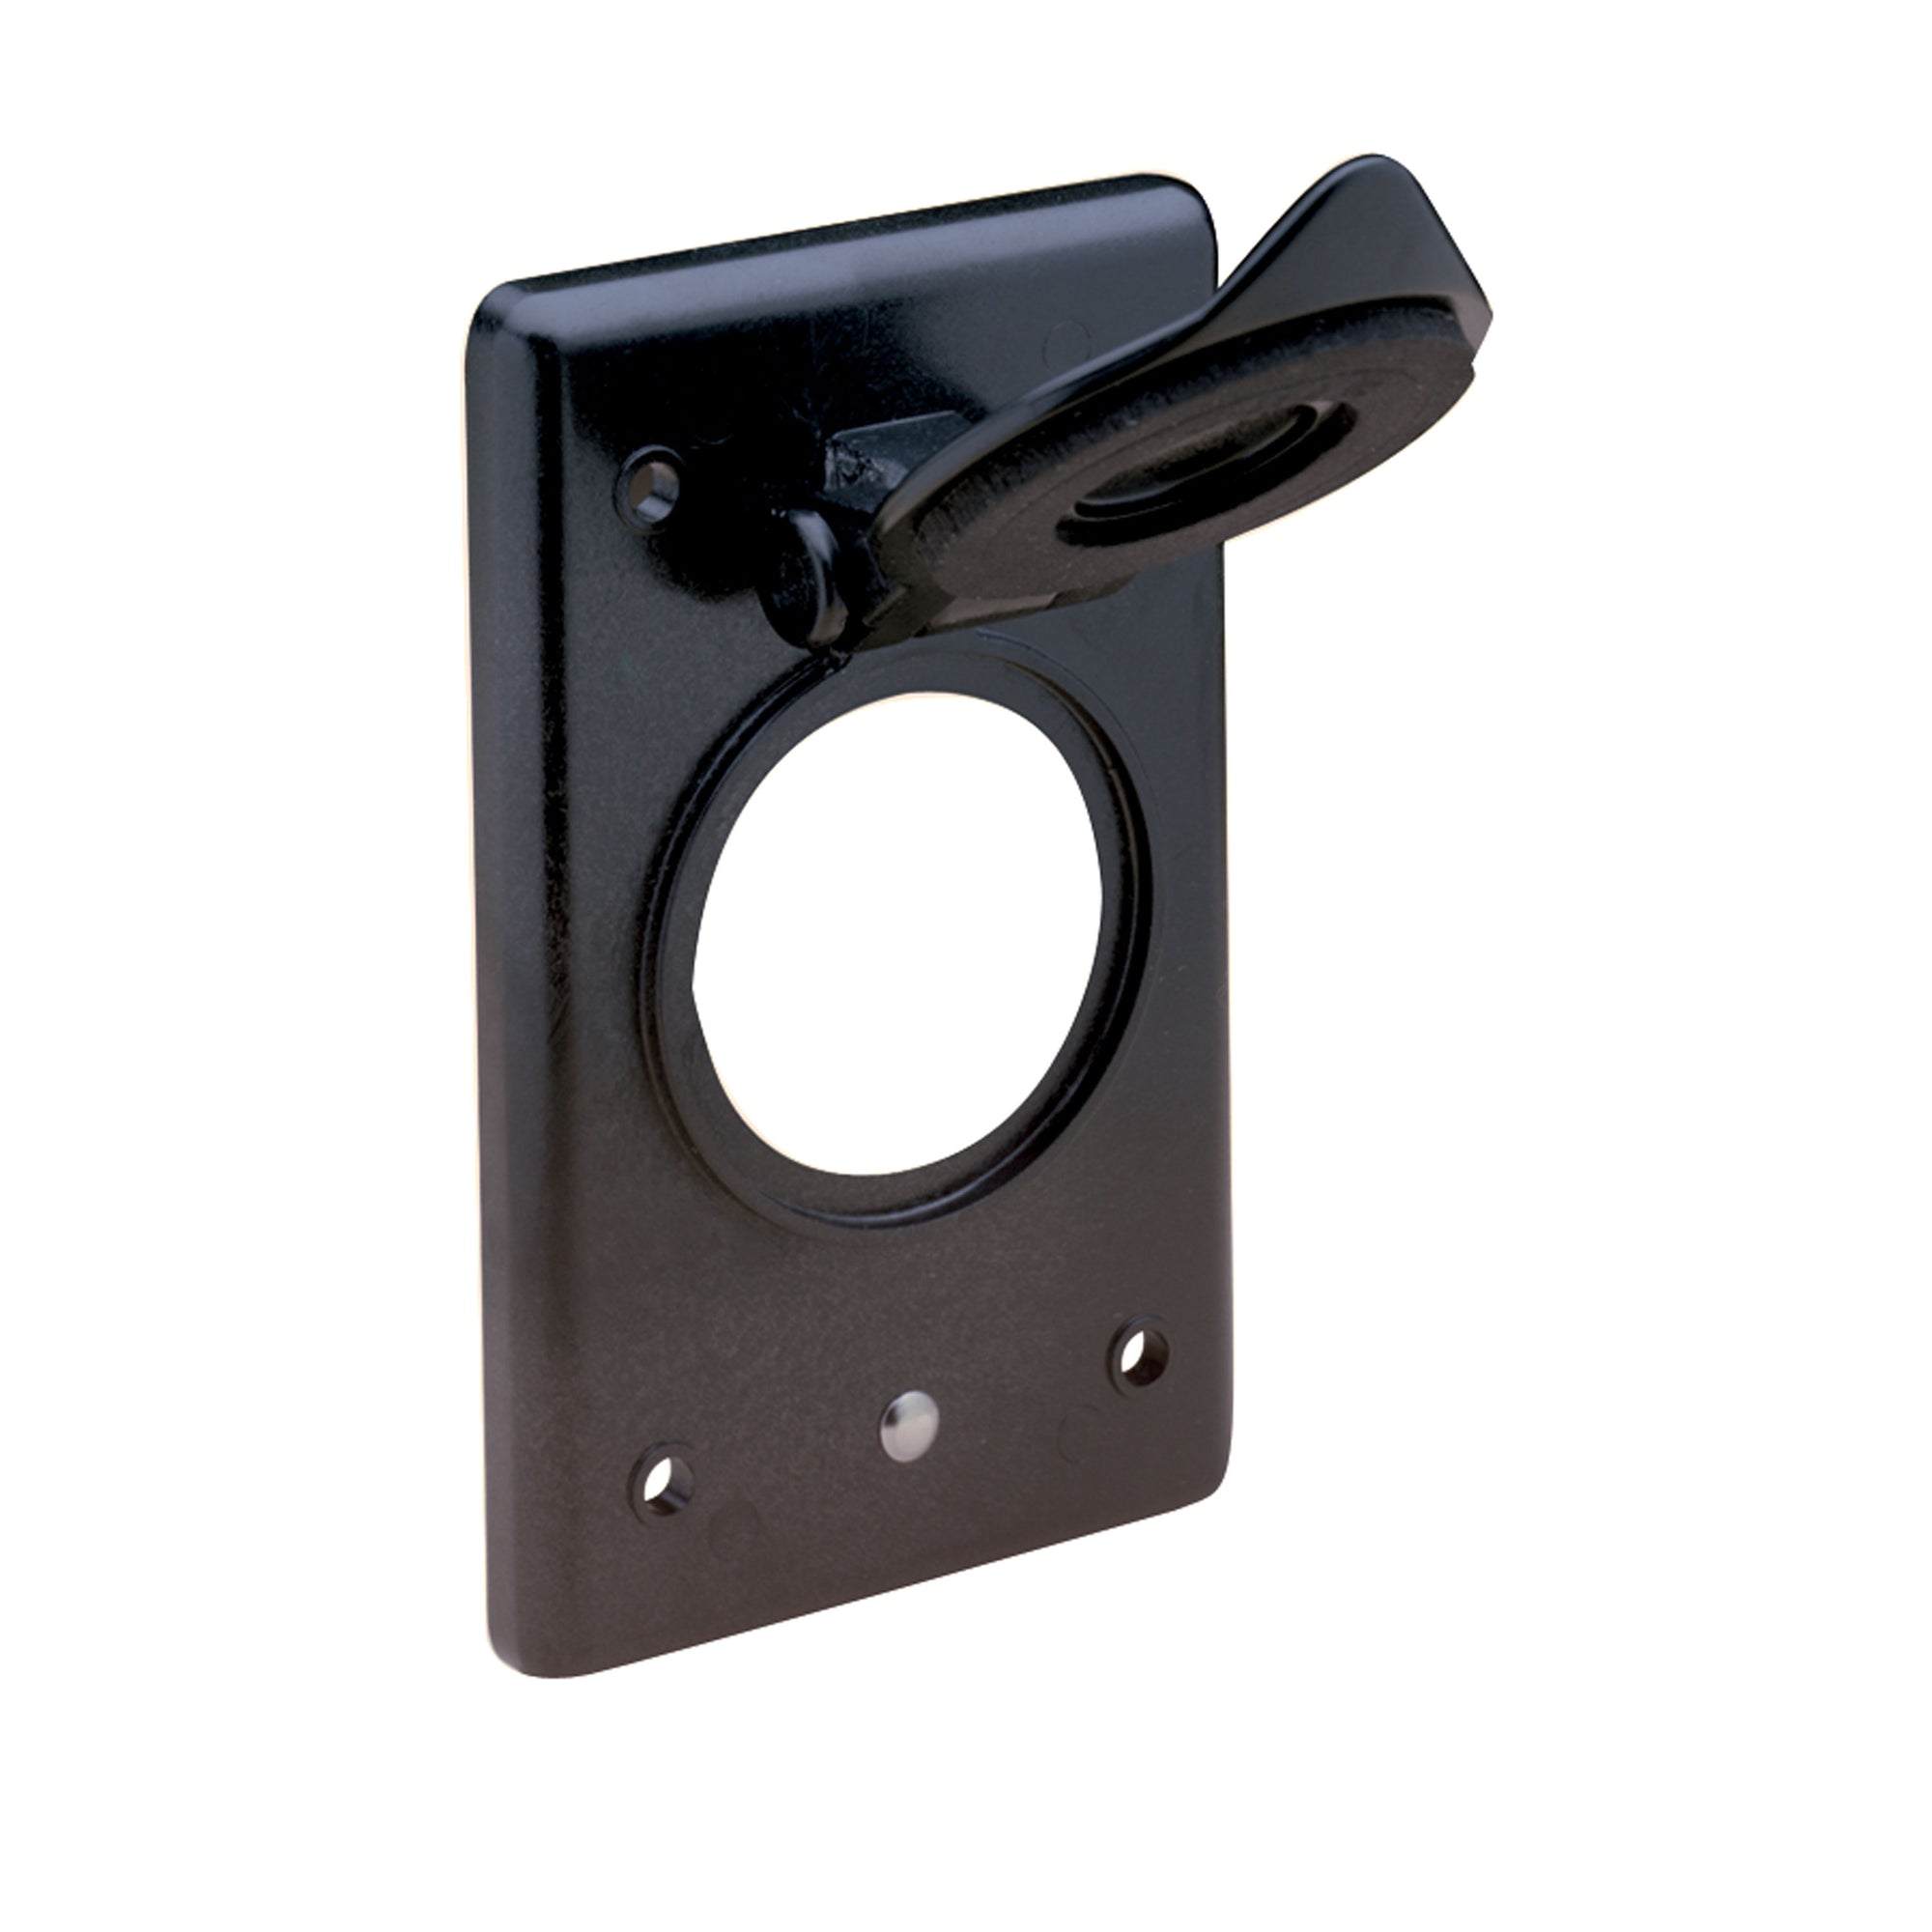 Marinco 2018MB Bracket for Trolling Motor Without Receptacle